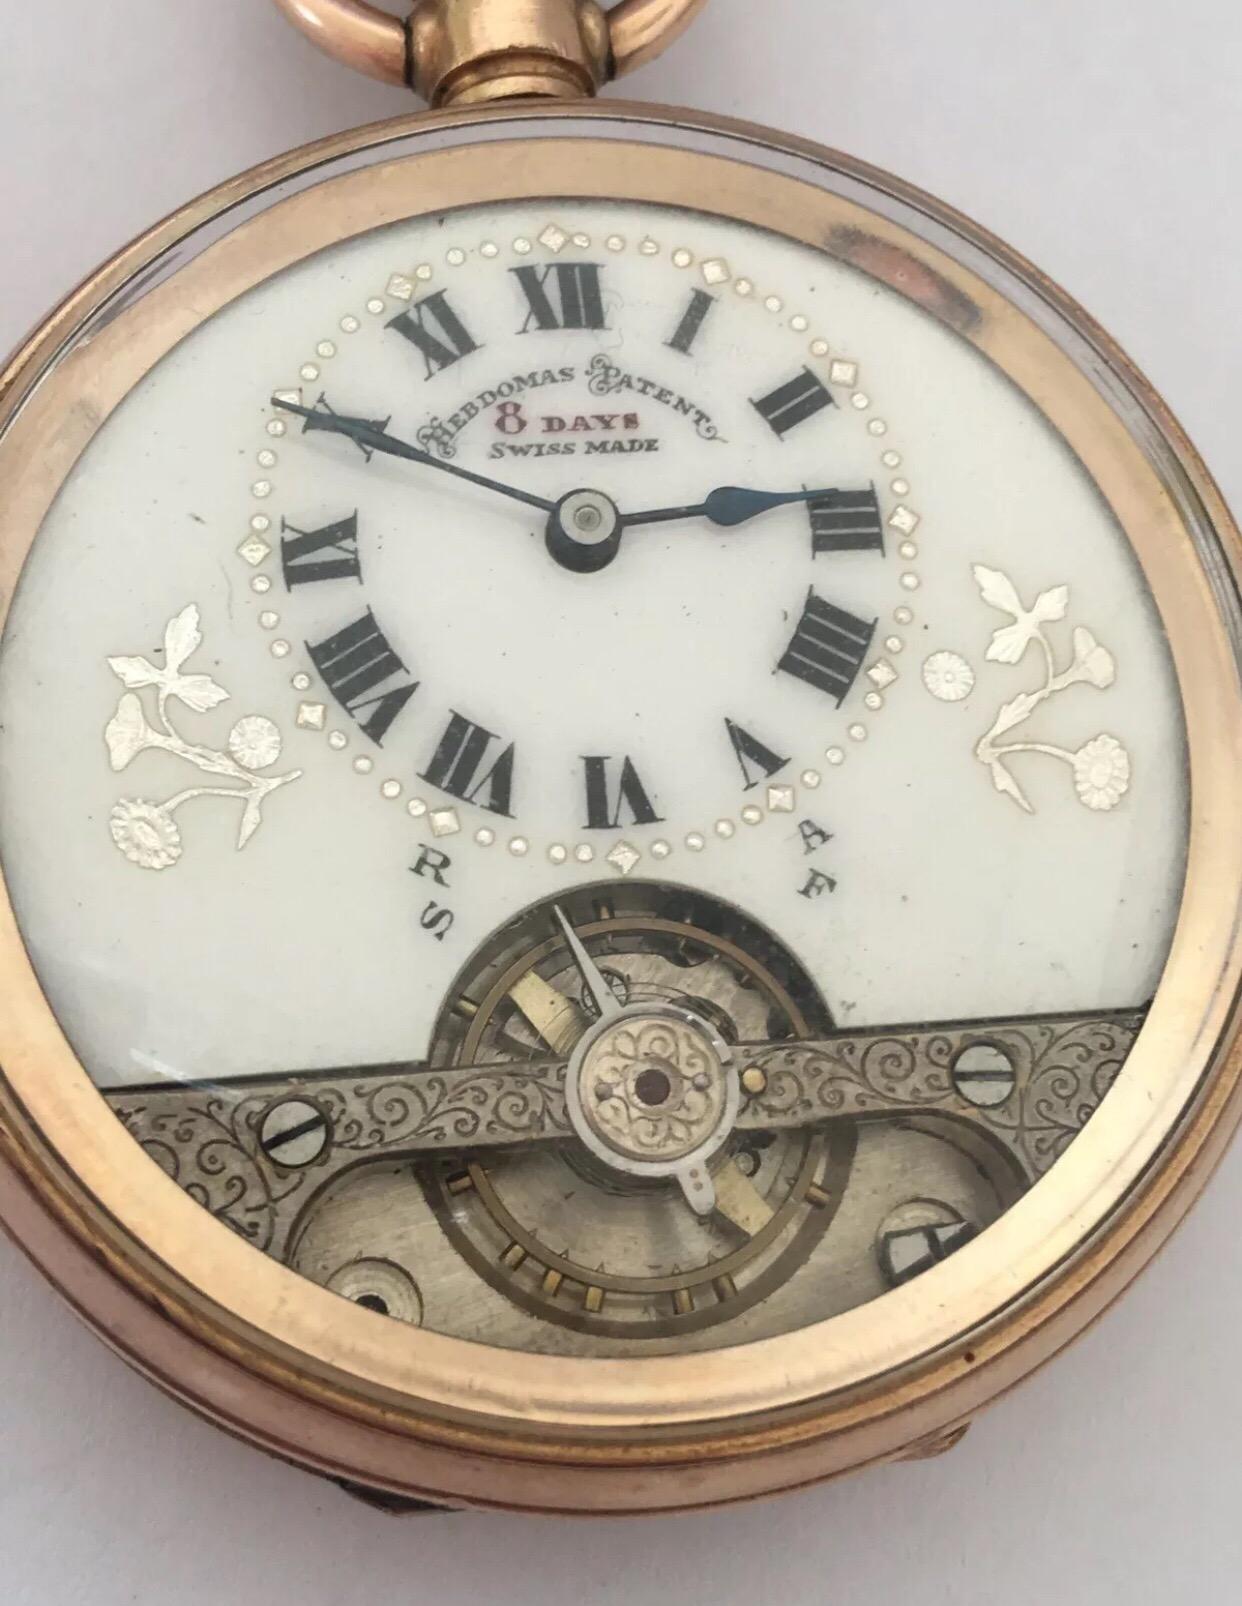 An 8 Days Swiss Made Hebdomas Visible Escapement Gold-Plated Pocket Watch 4